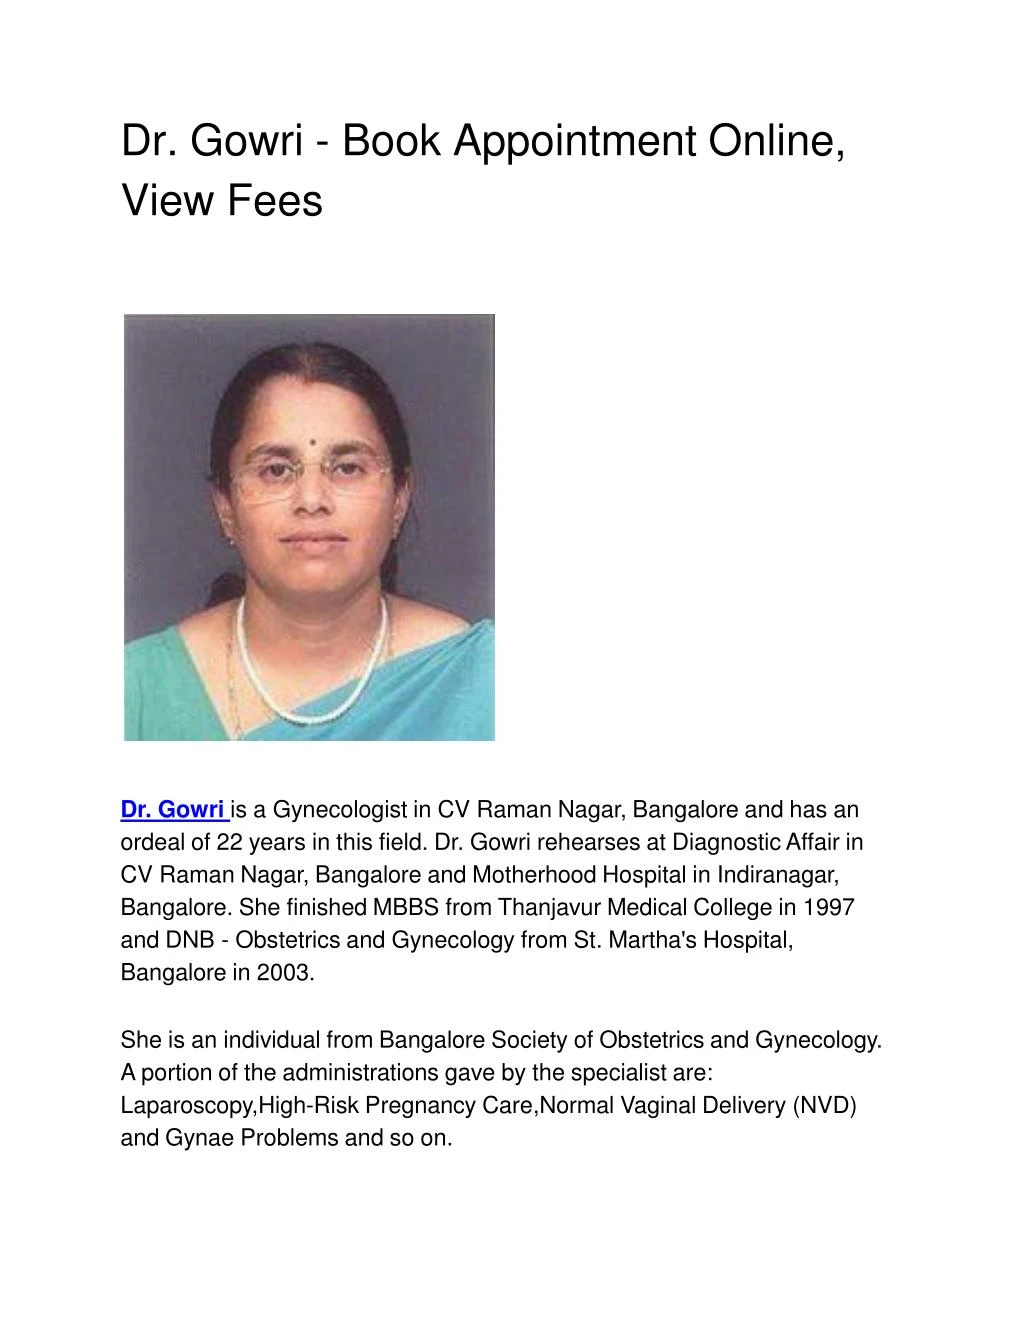 dr gowri book appointment online view fees